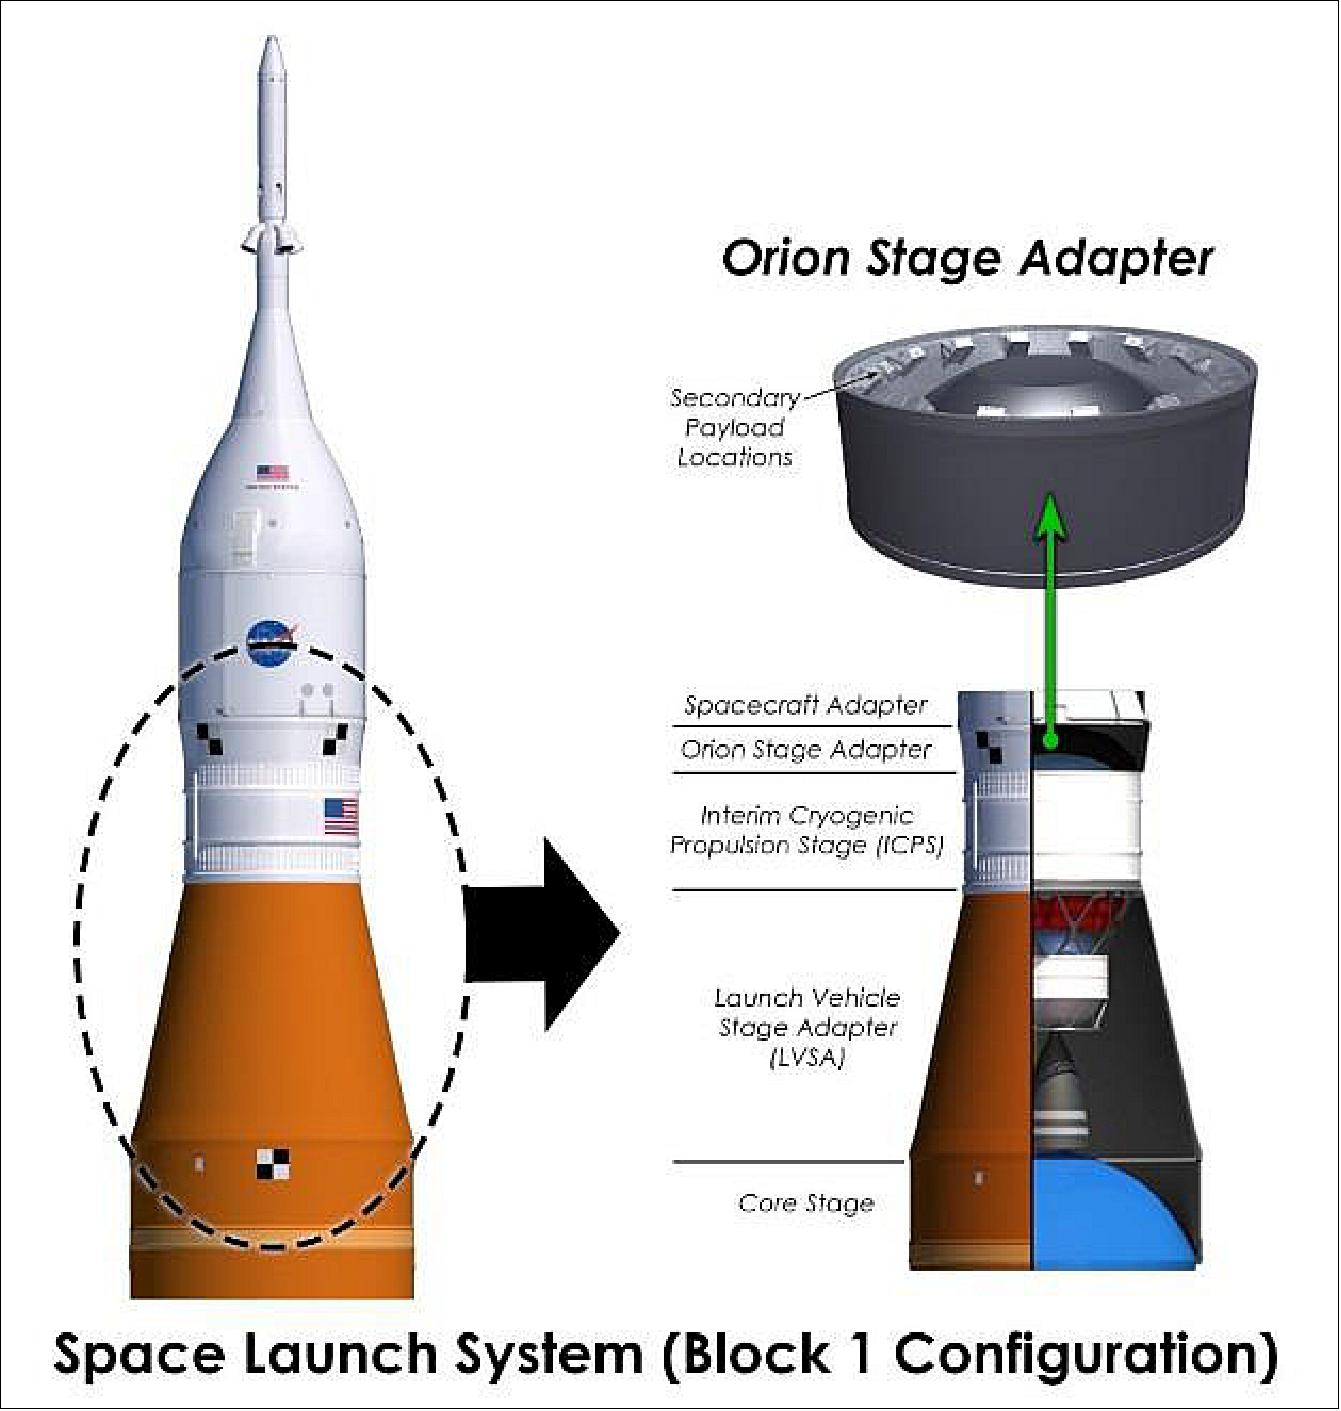 Figure 93: At the top of the Block 1 configuration, the OSA (Orion Stage Adapter) has capacity for 13-17 smallsats; the SLS Program provides an integrated deployment system for the payloads (image credit: NASA)